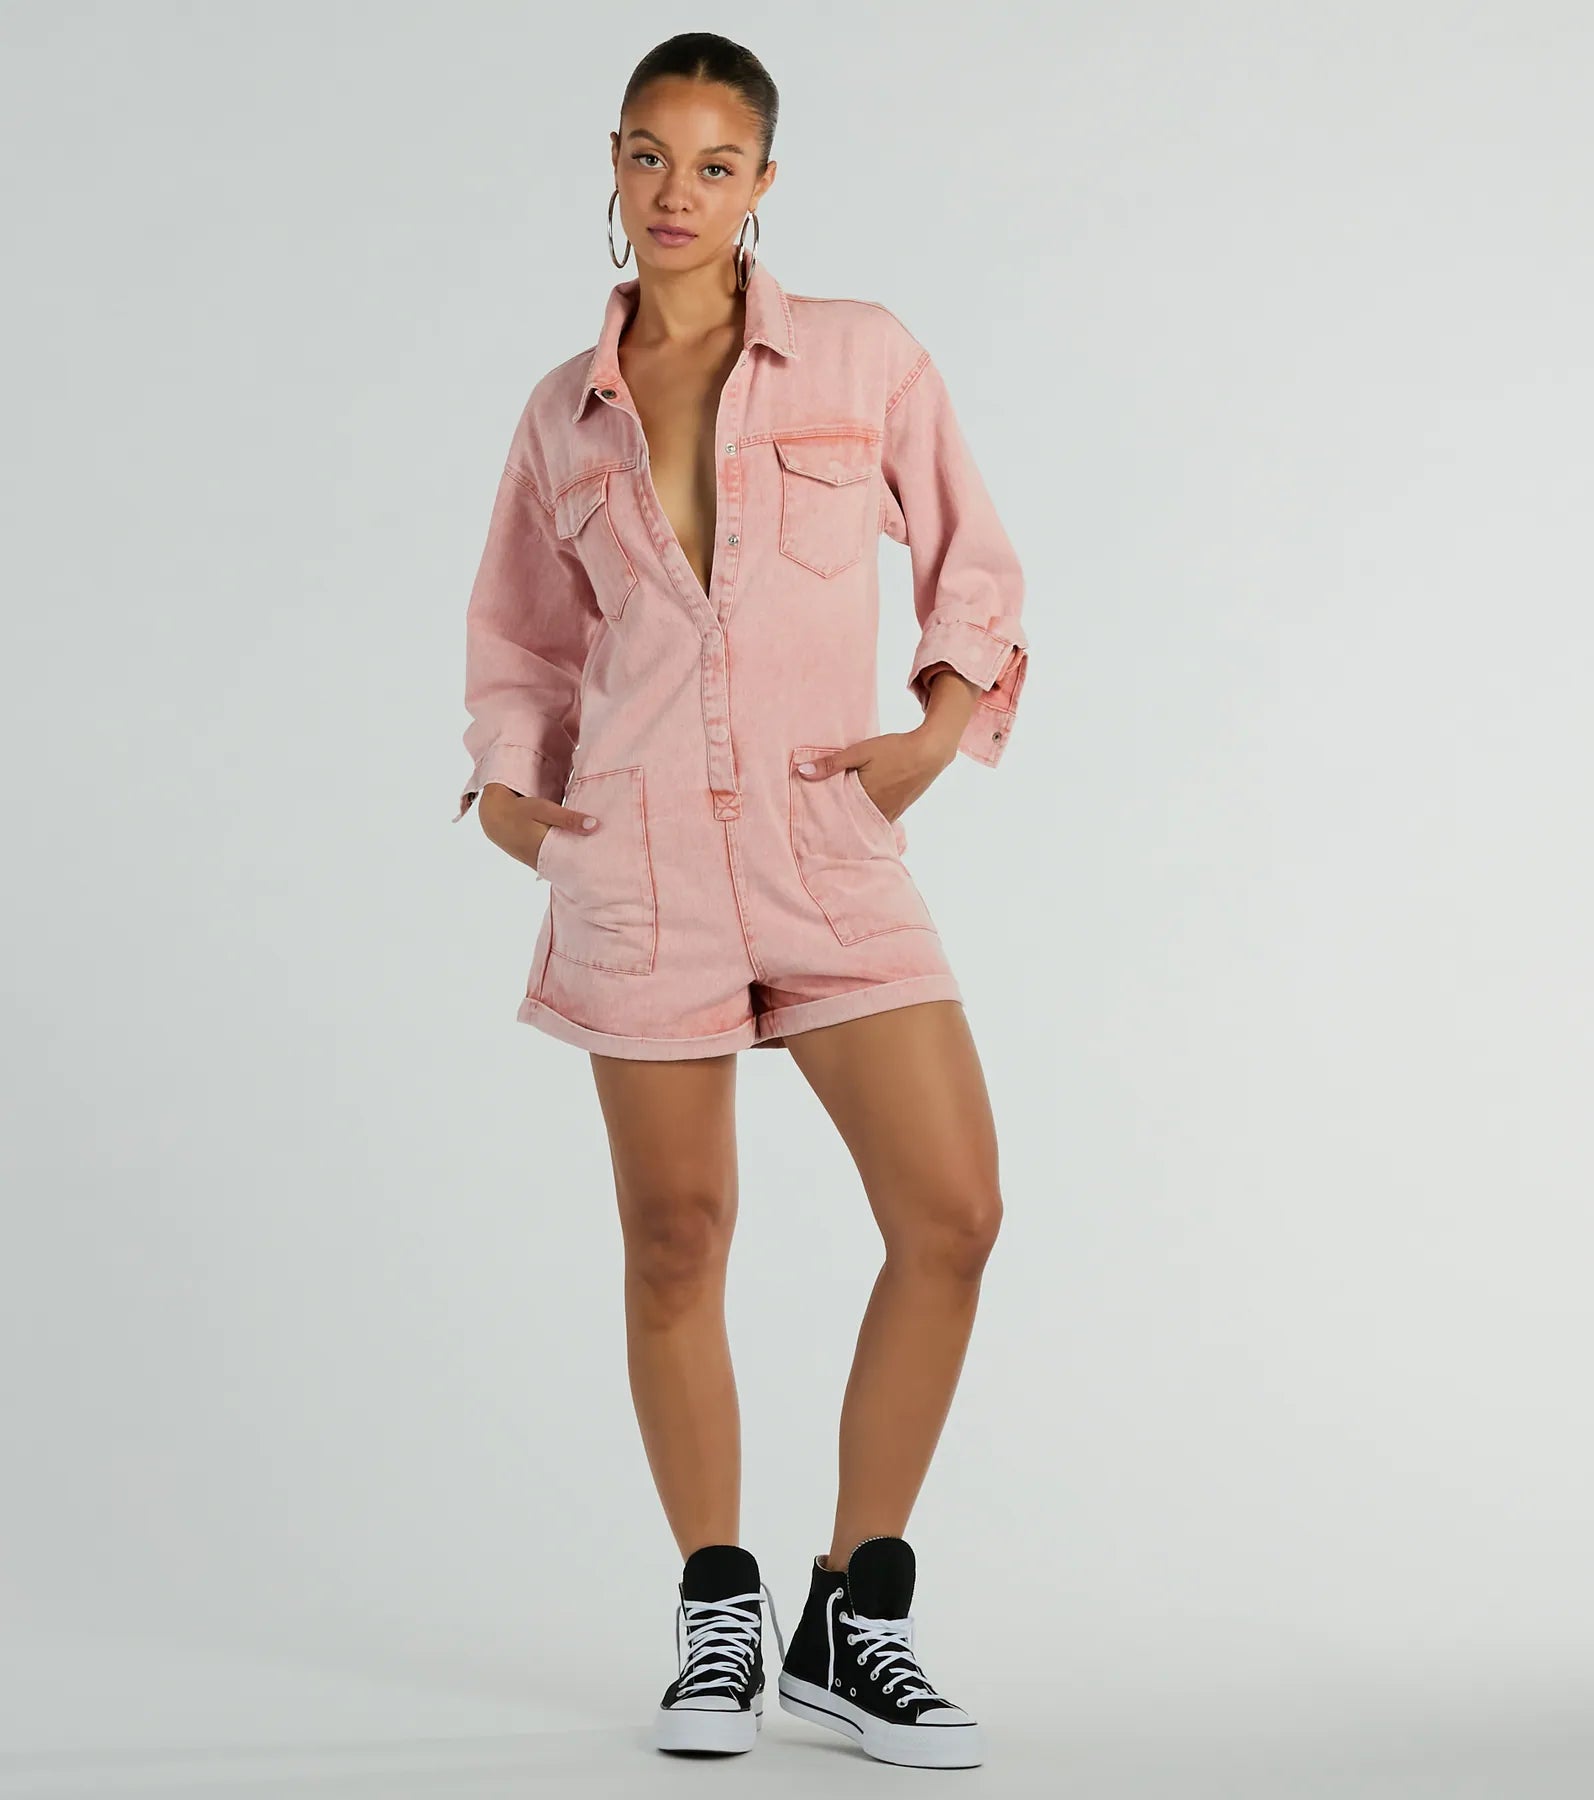 Denim Collared Long Sleeves Button Front Pocketed Romper